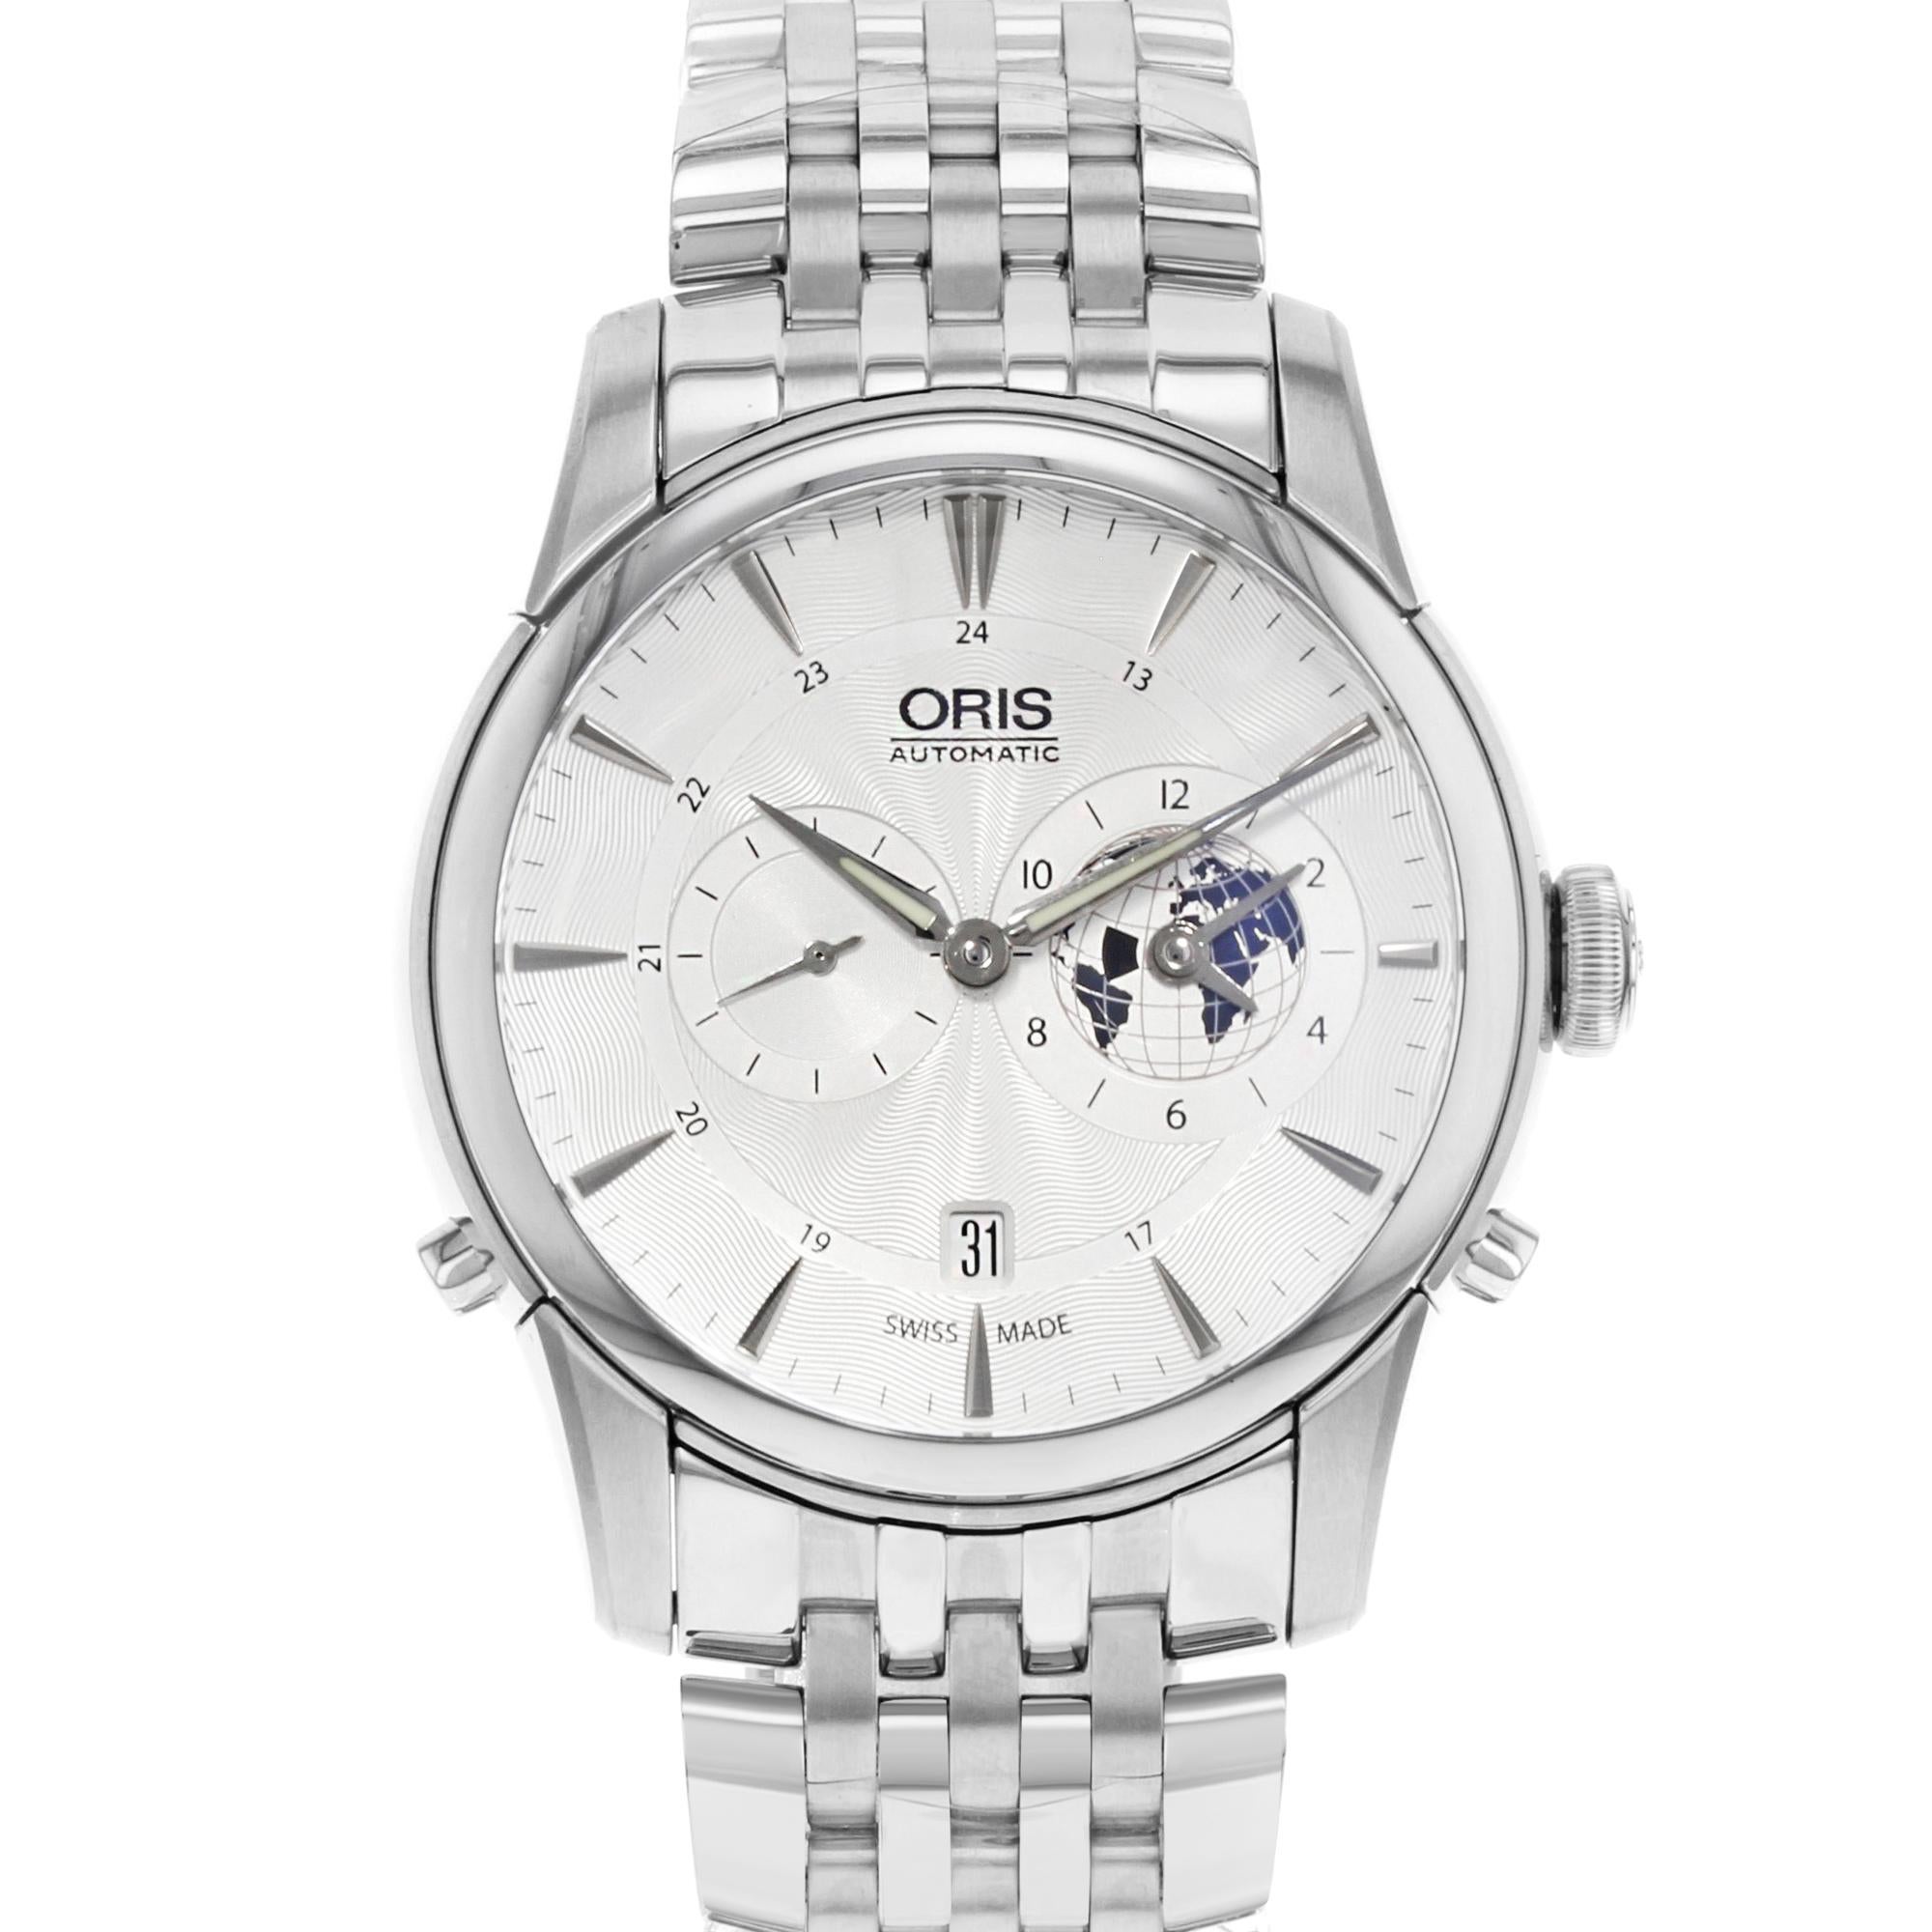 This display model Oris Artelier 01 690 7690 4081-07 8 22 77 is a beautiful men's timepiece that is powered by mechanical (automatic) movement which is cased in a stainless steel case. It has a round shape face, date indicator, multiple time zones,